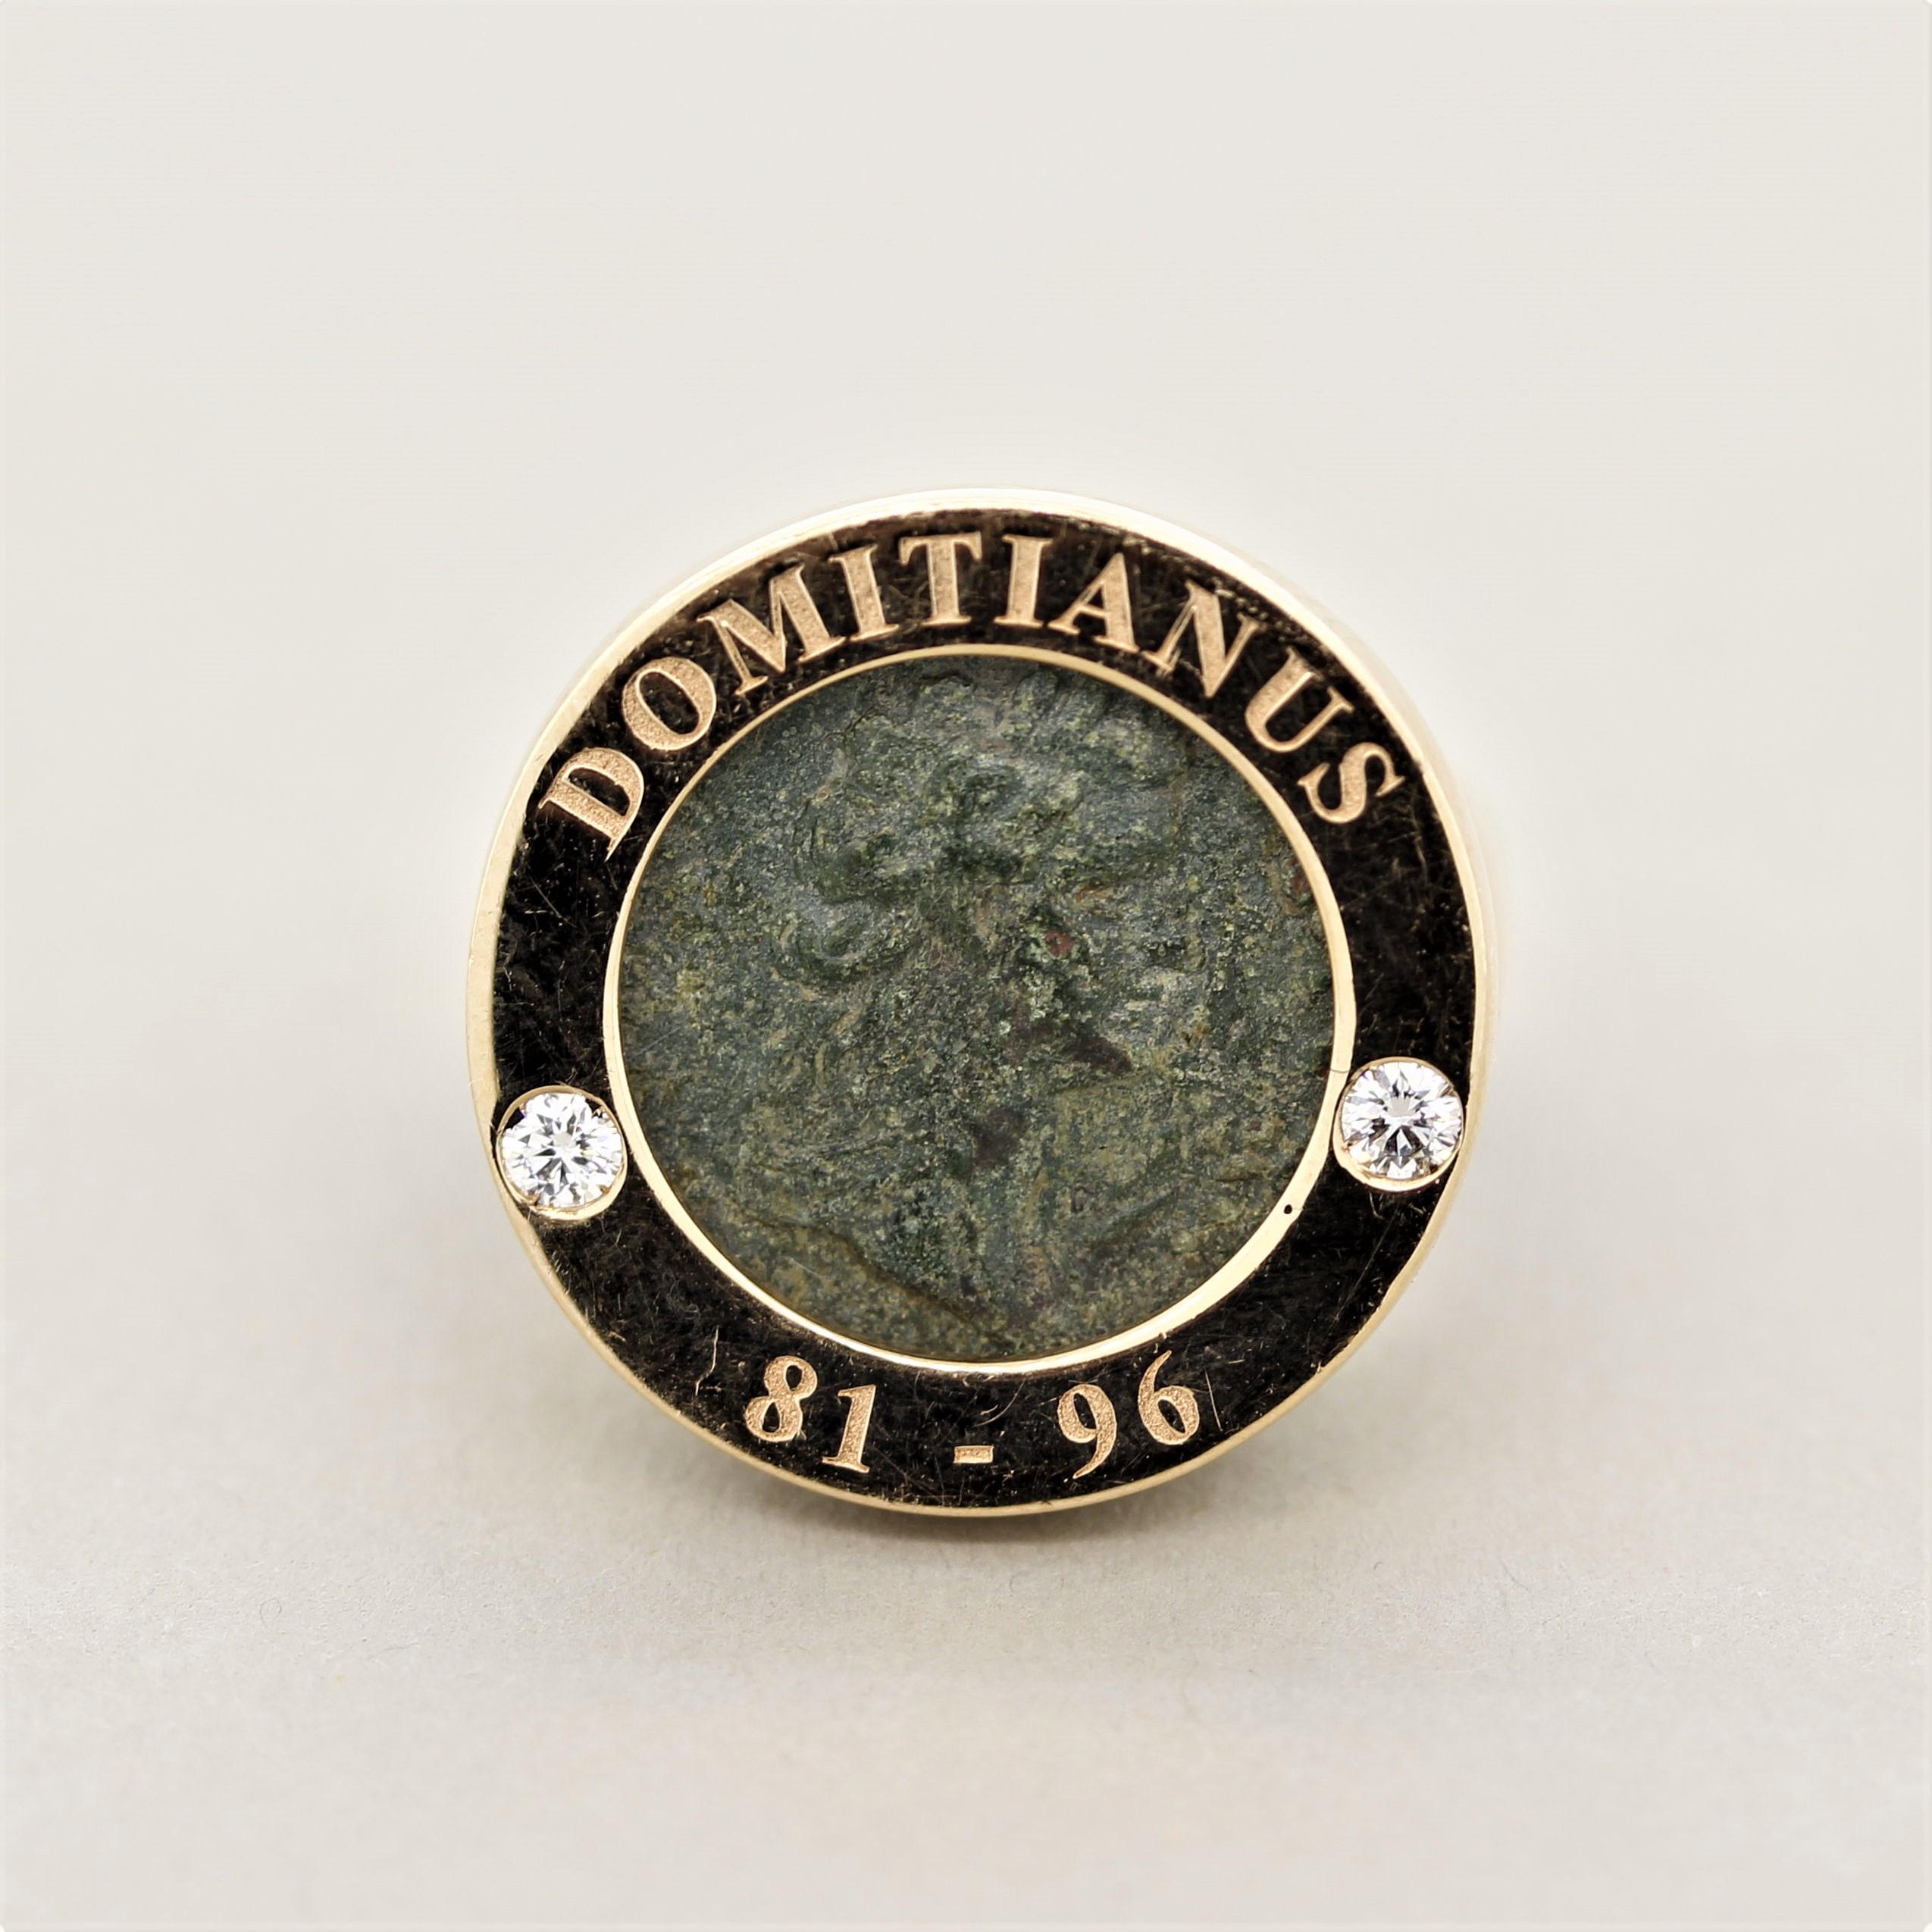 A ring made in Italy using a true ancient coin! The ring is made in 18k rose gold and has two round brilliant cut diamonds set on its top weighing a total of 0.11 carats. Set in the middle of the ring is an ancient coin over 2 centuries old, circa